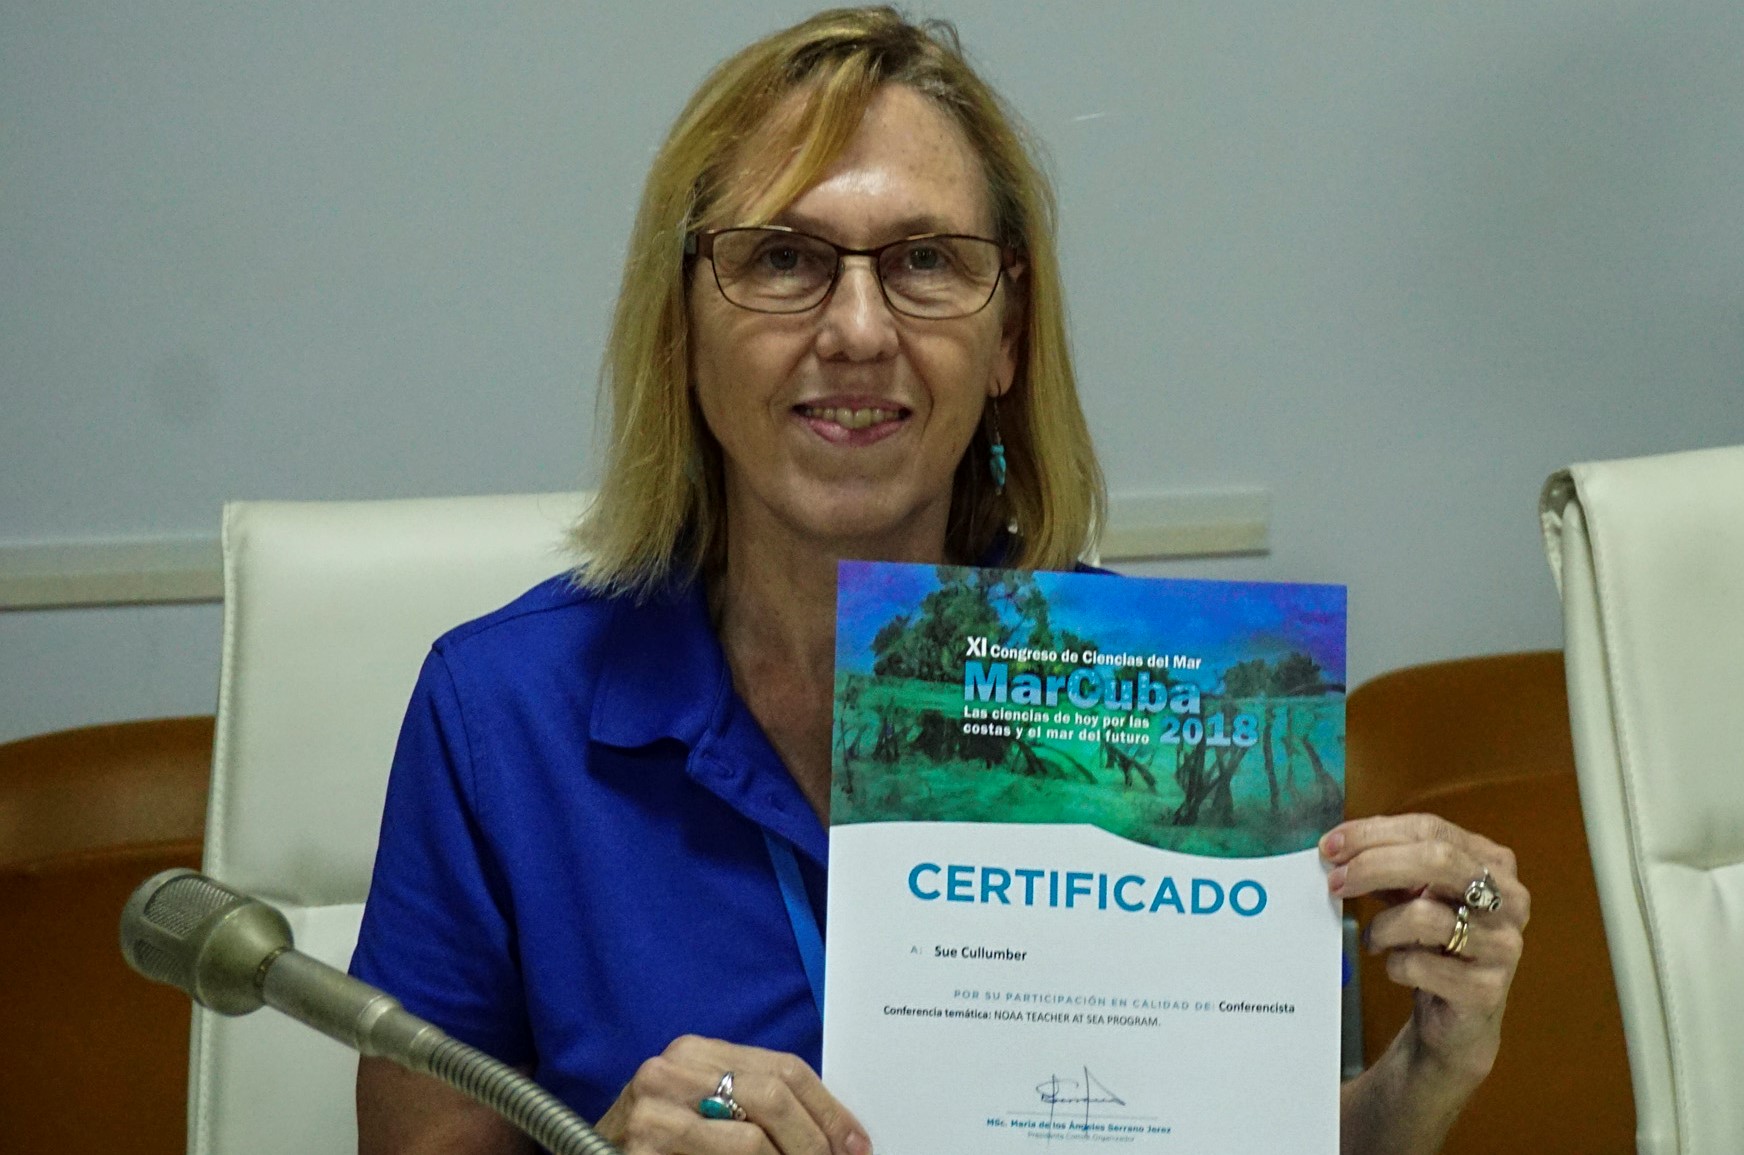 A woman in a blue shirt holds up a certificate.